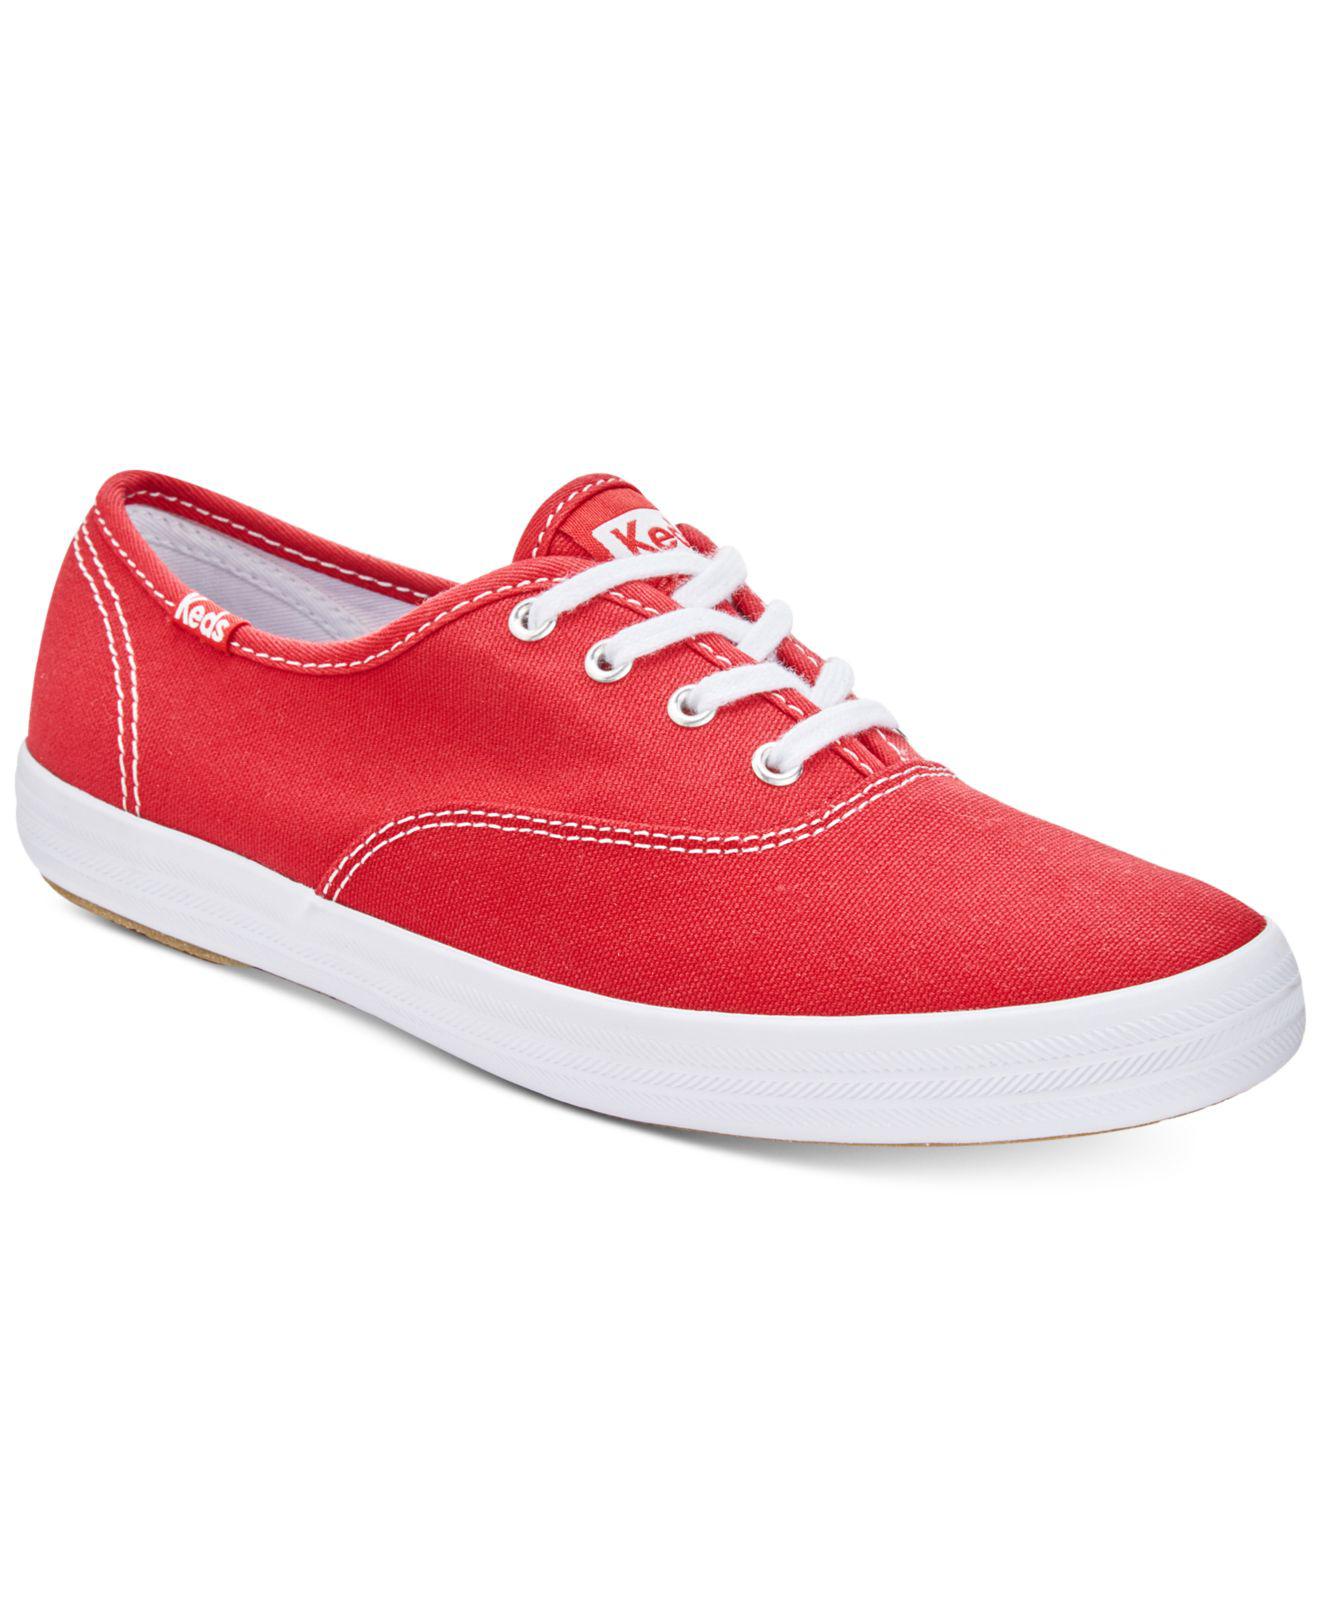 Keds Canvas Champion Ortholite® Lace-up Oxford Fashion Sneakers in Red ...